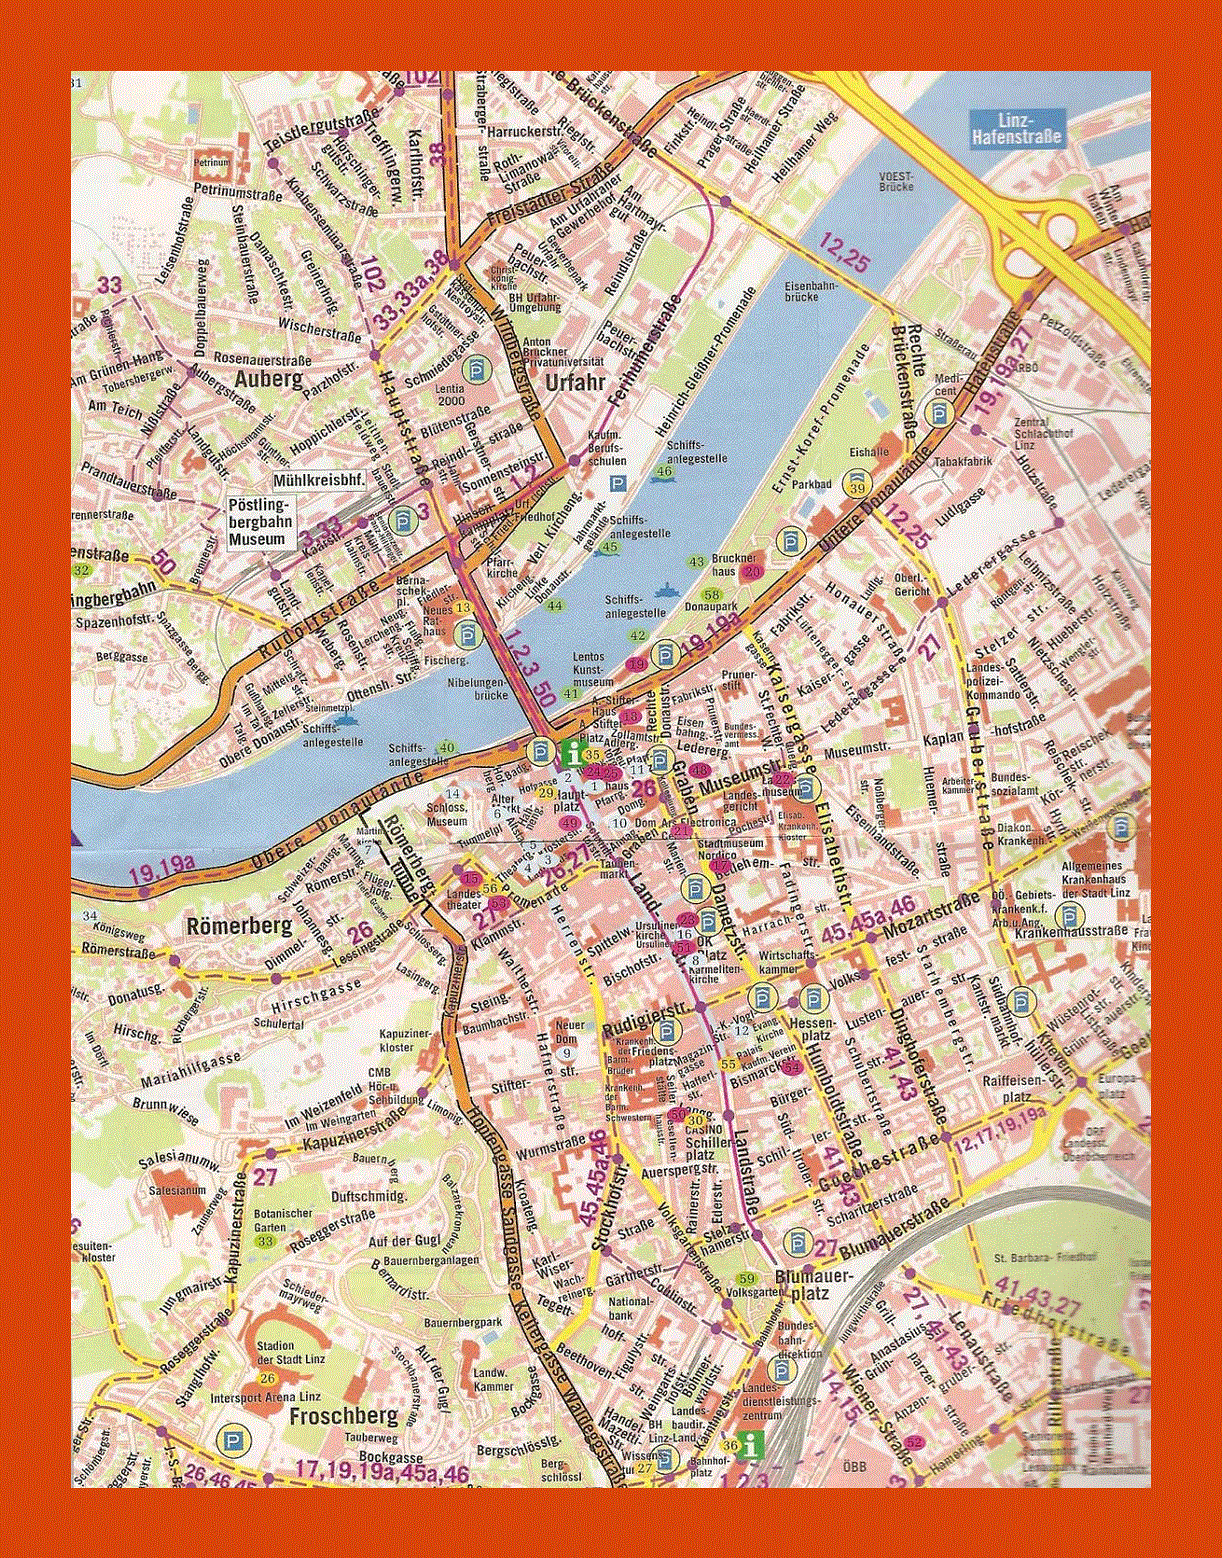 Road map of Linz city center